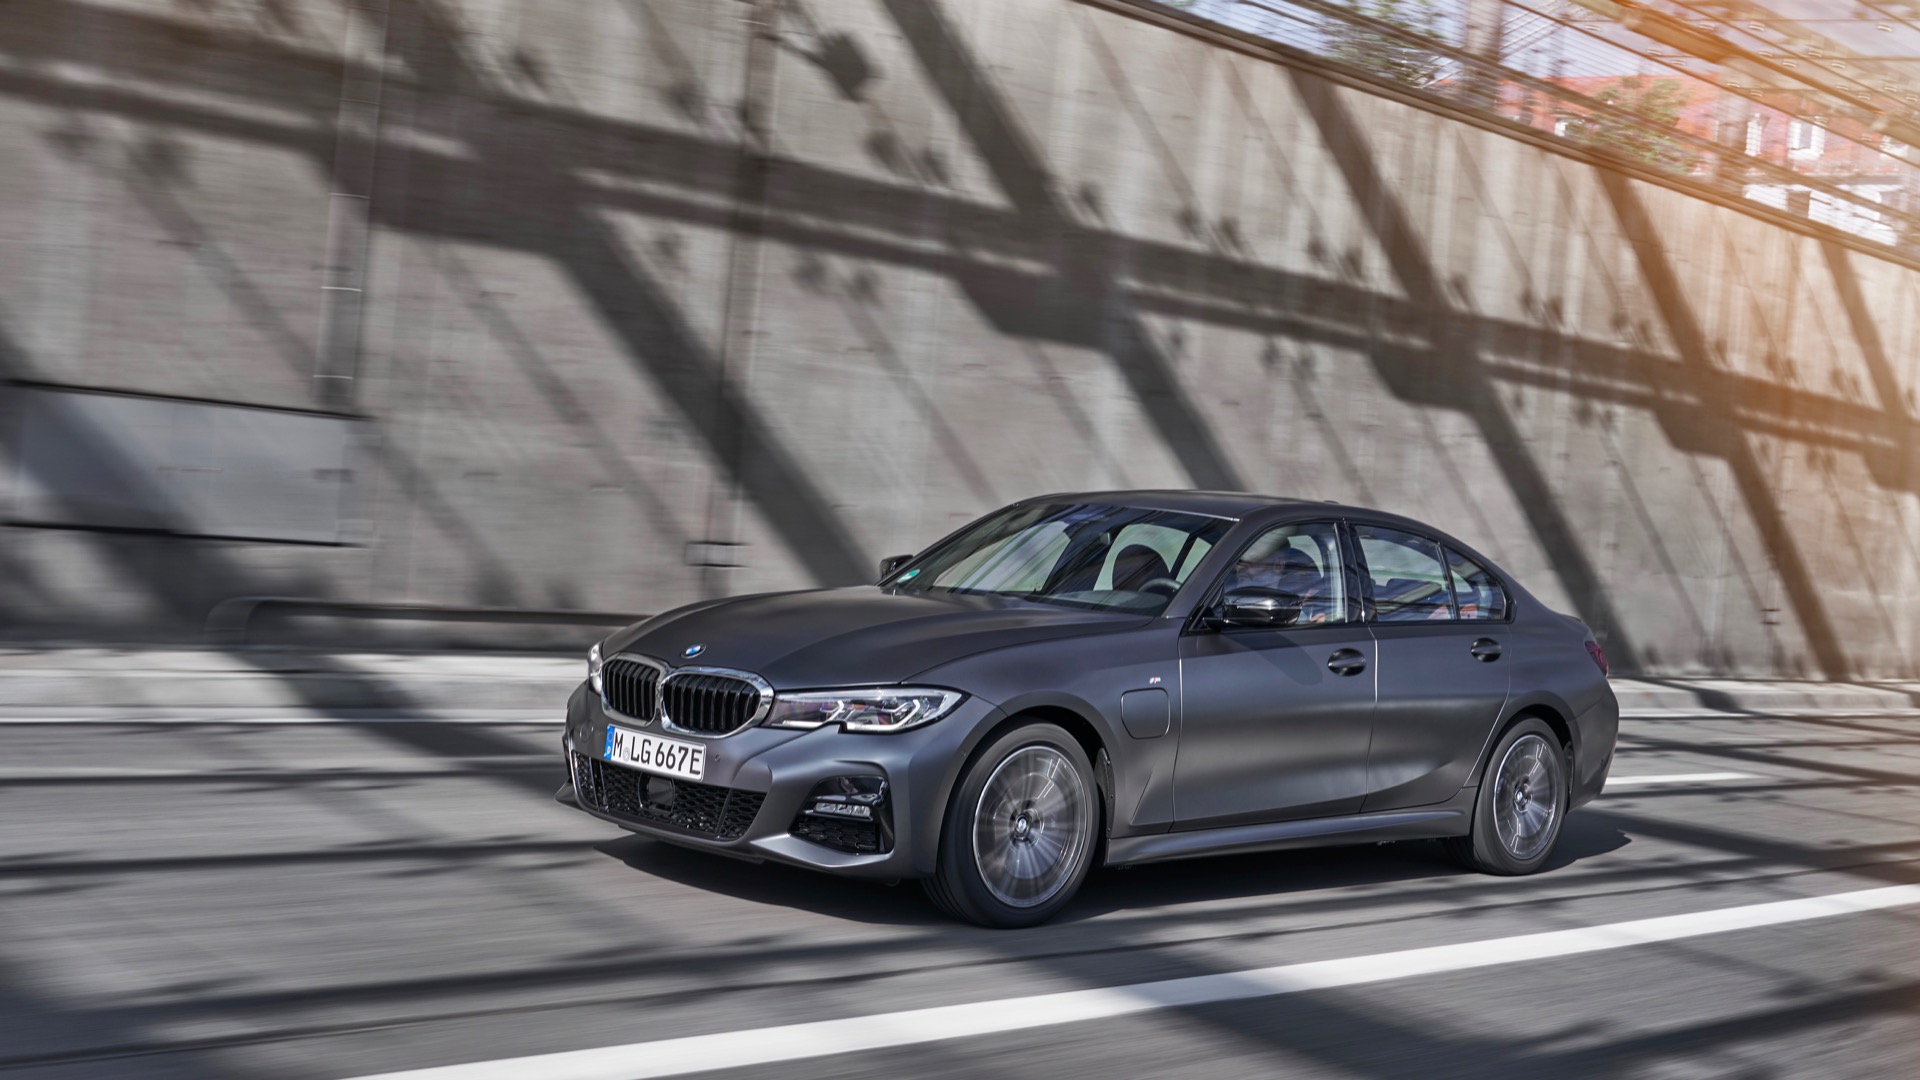 2021 BMW 330e and 330e xDrive PHEVs revealed with 20 miles of electric range